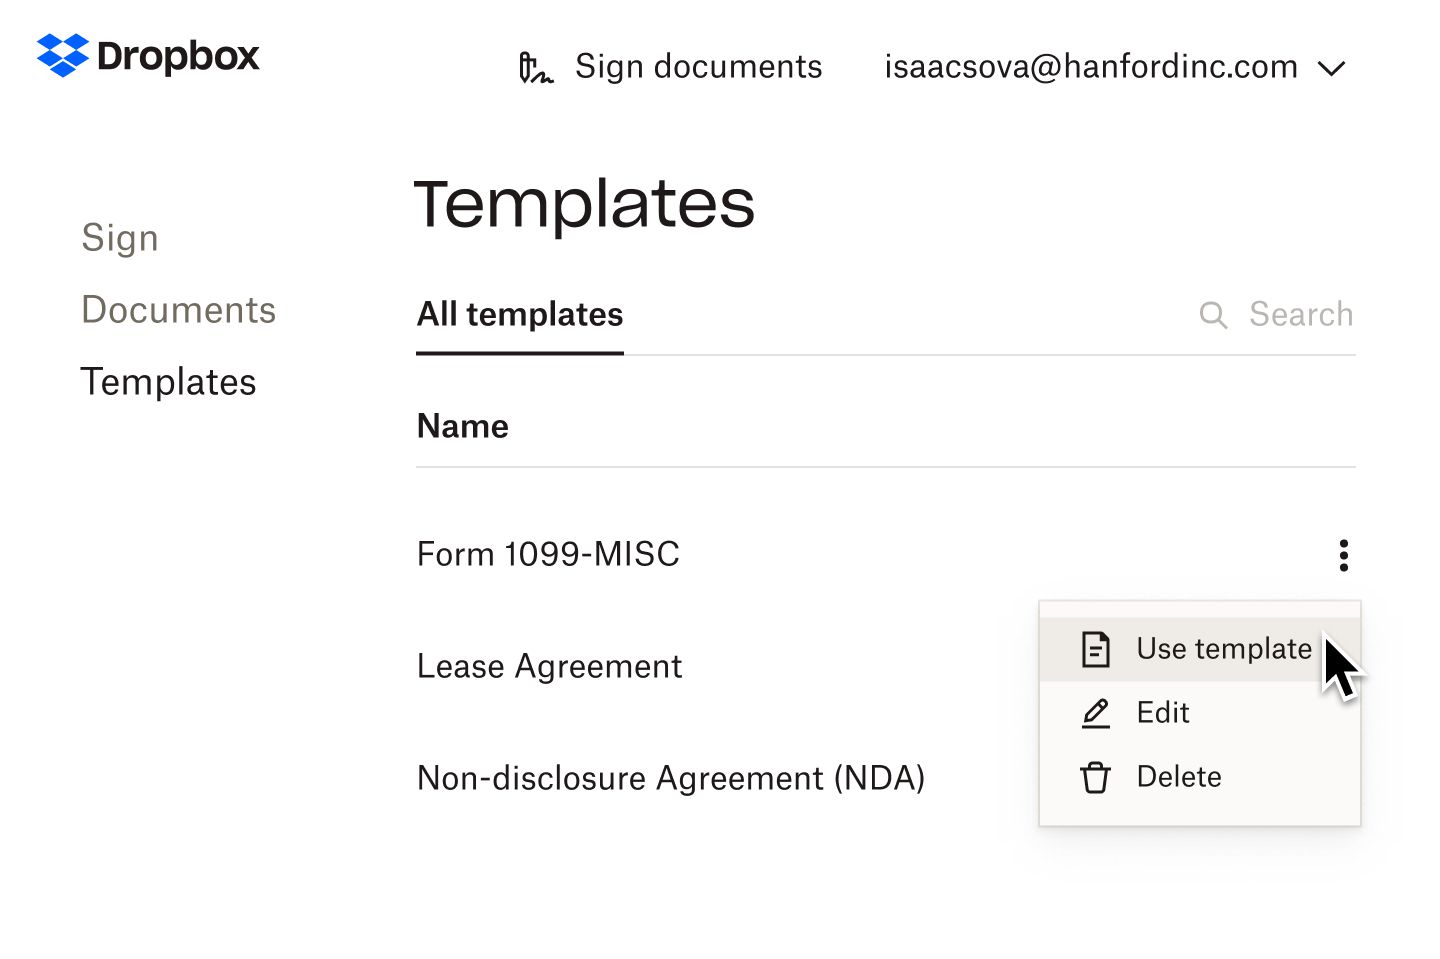 A user selecting “Share” in the “Use template” dropdown for a 1099-MISC form template